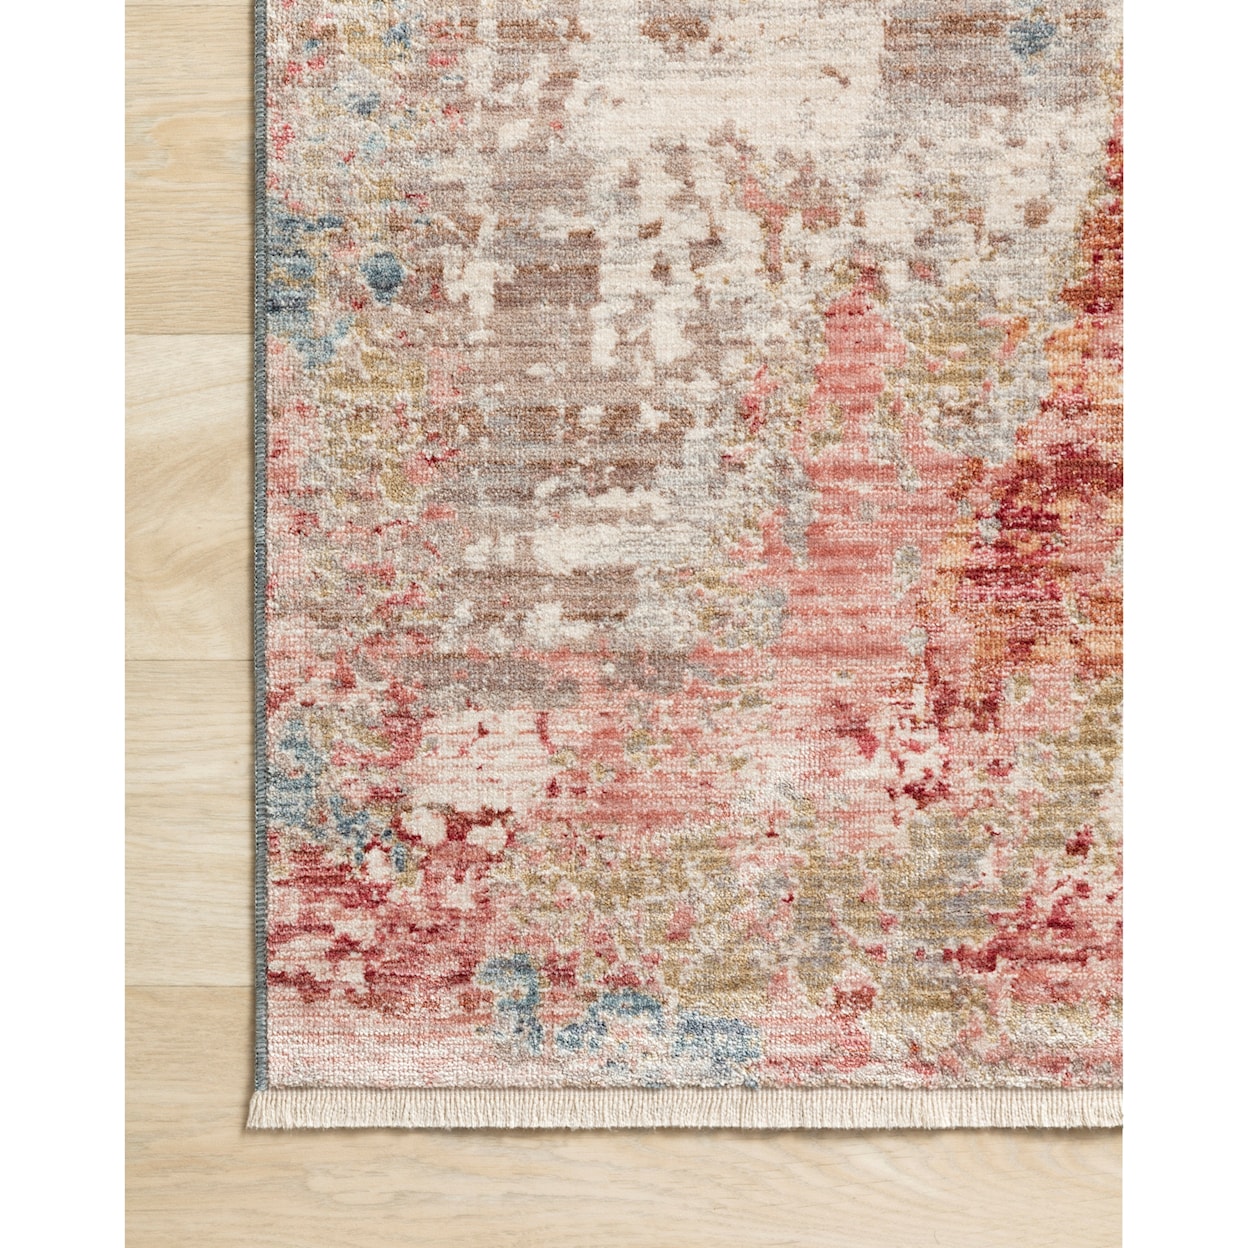 Loloi Rugs Claire 3'7" x 5'1" Grey / Multi Rug